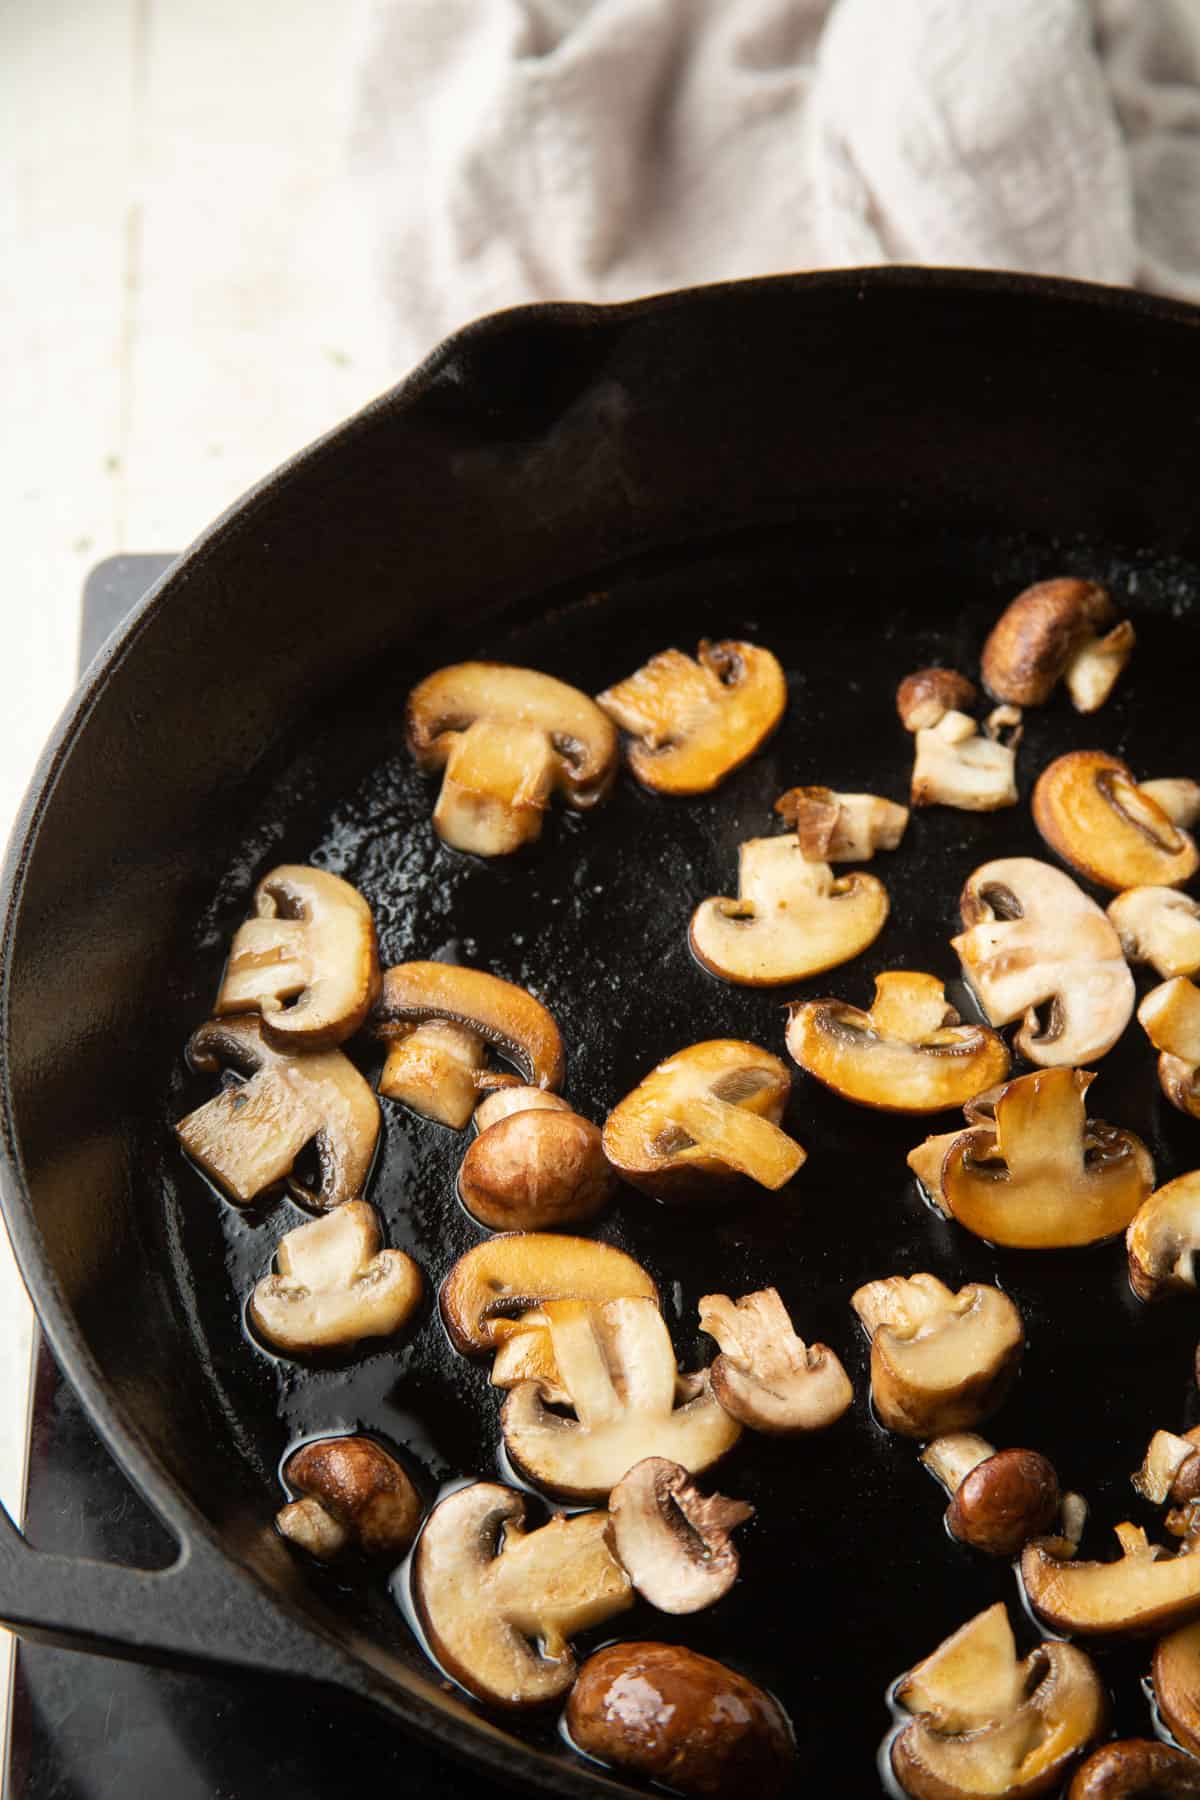 Mushrooms cooking in a skillet.